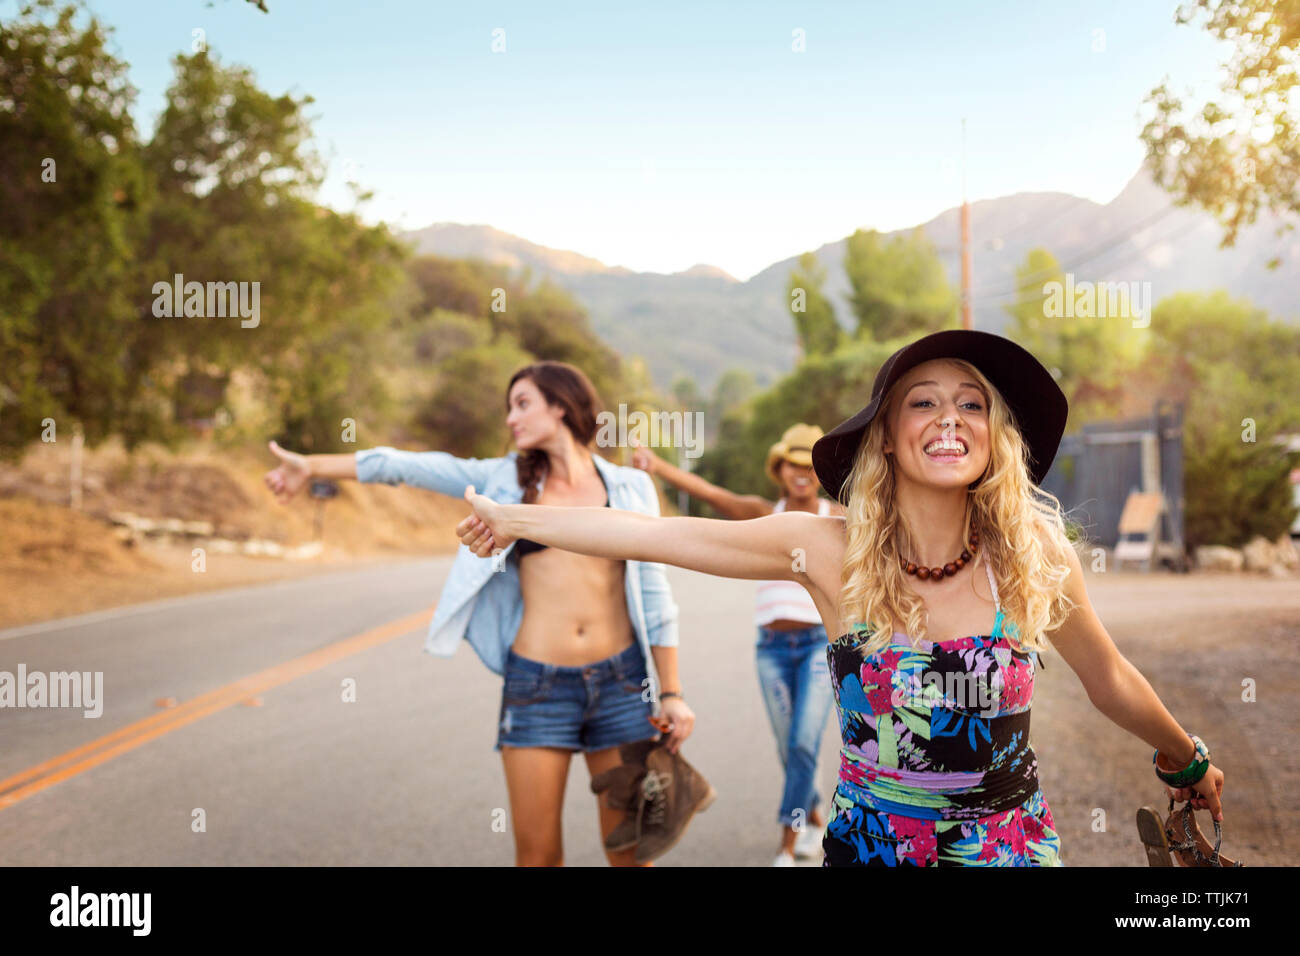 Women hailing while standing at road Stock Photo